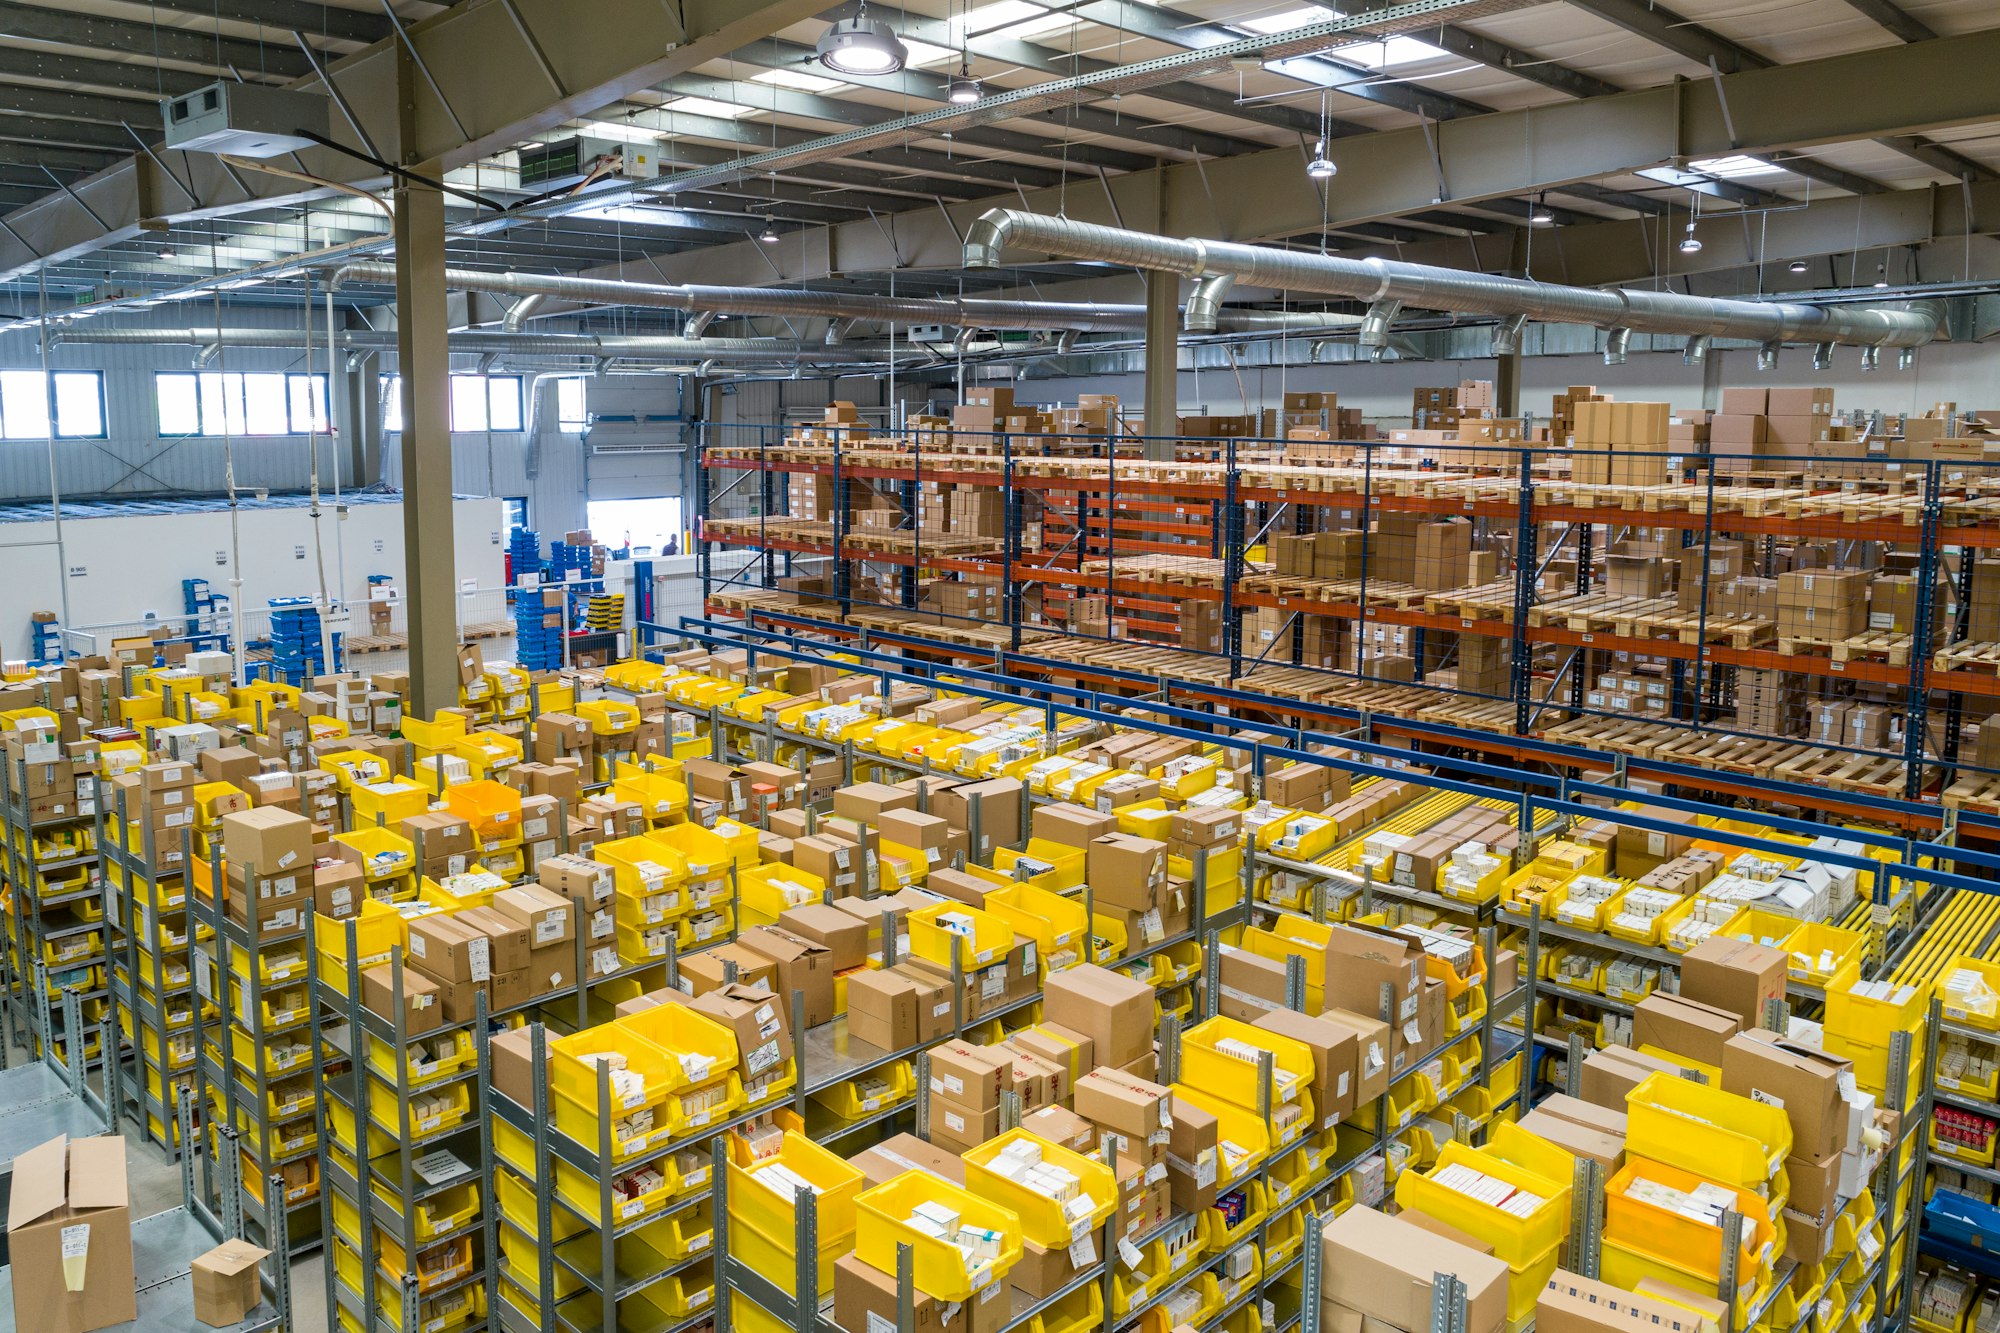 Amazon to close three of its warehouses in the UK, impacting 1,200 jobs